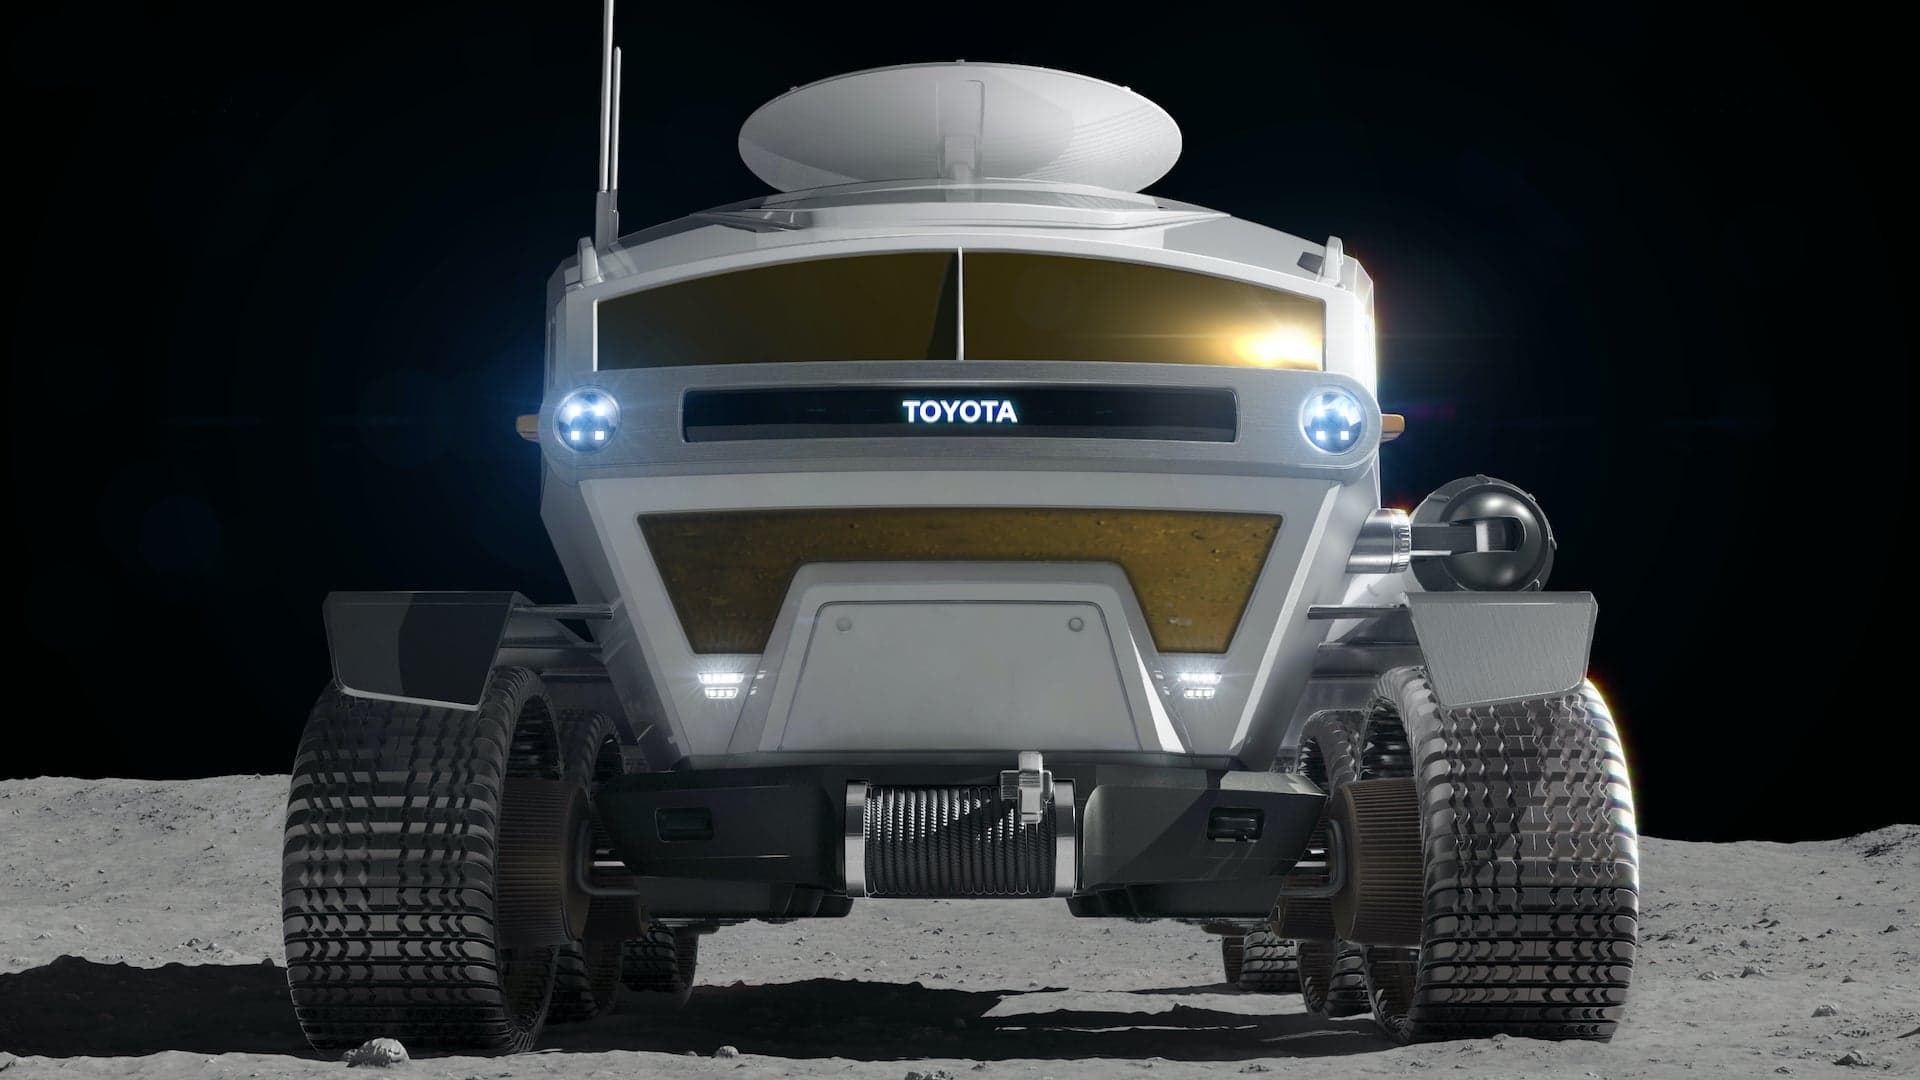 Japan’s New ‘Lunar Cruiser’ Moon Rover Is Named After the Toyota Land Cruiser